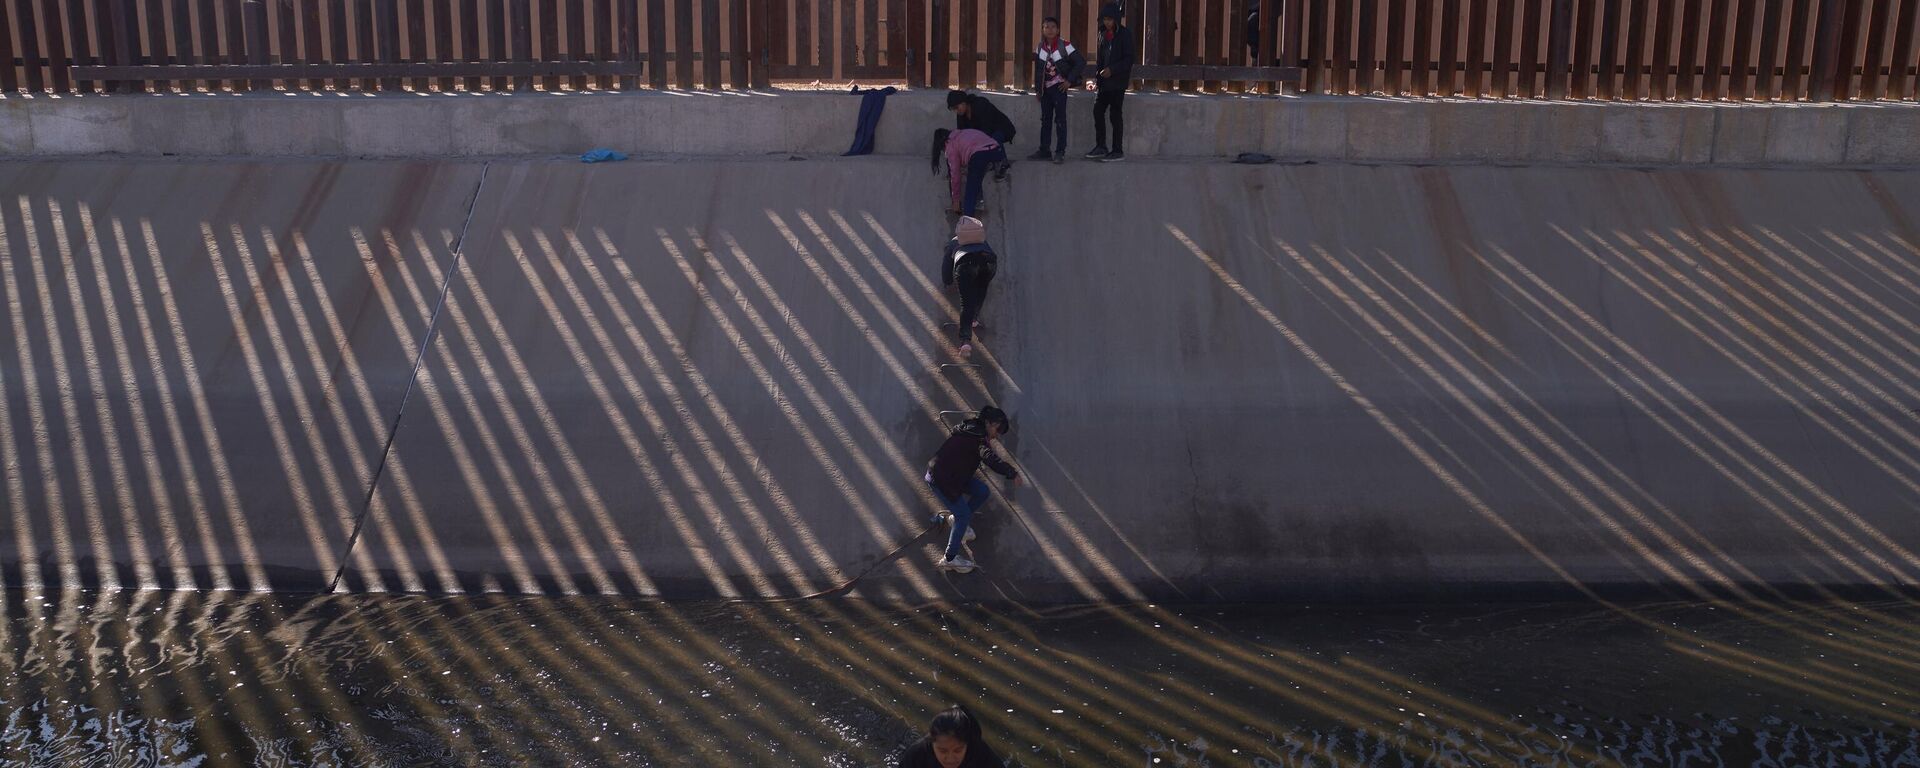 Migrants illegally cross into the United States from Mexico via a hole cut in the border fence in El Paso, Texas, US on December 21, 2022.  - Sputnik International, 1920, 28.12.2022